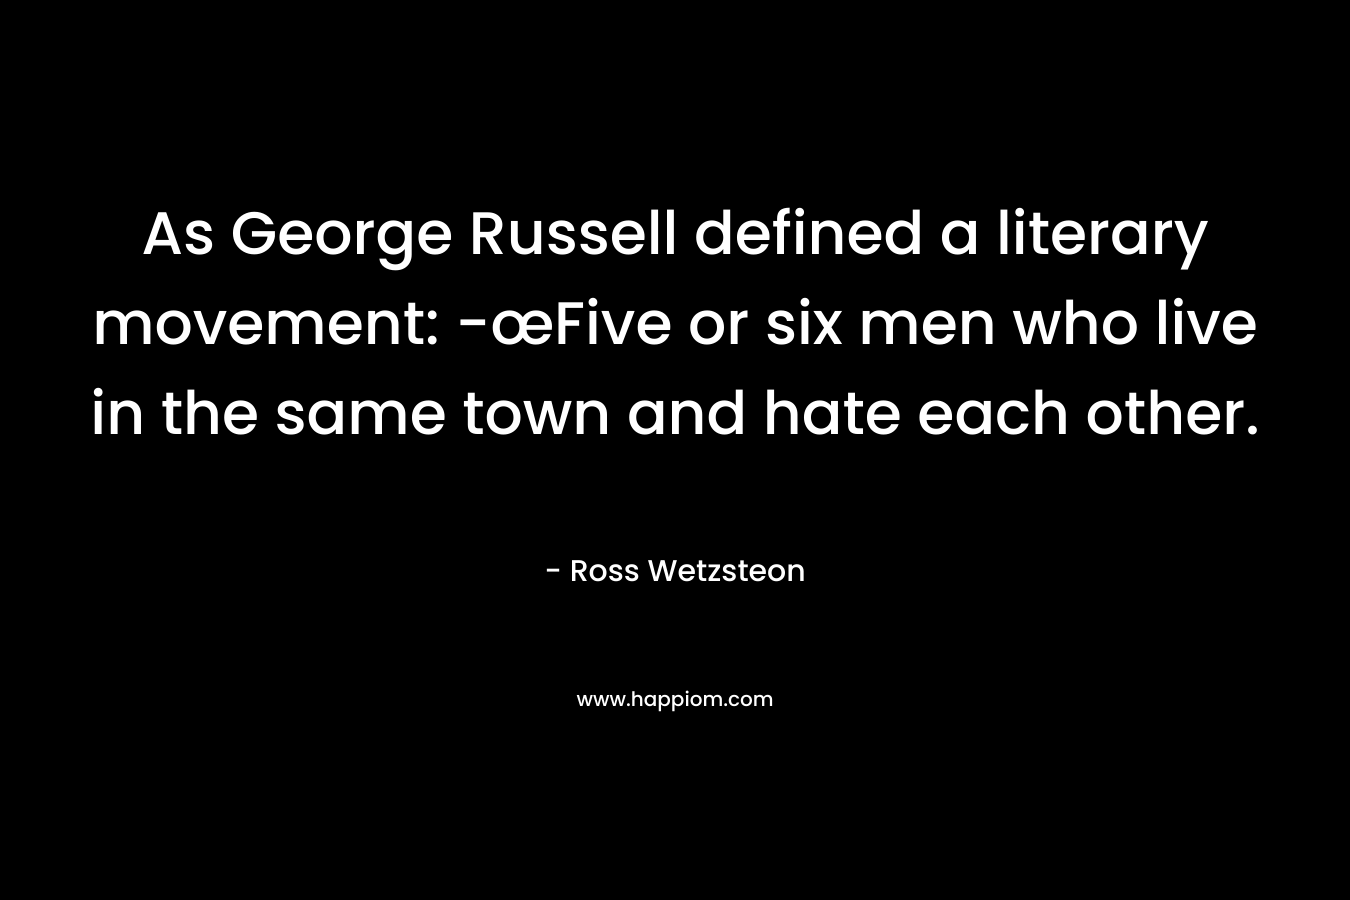 As George Russell defined a literary movement: -œFive or six men who live in the same town and hate each other.